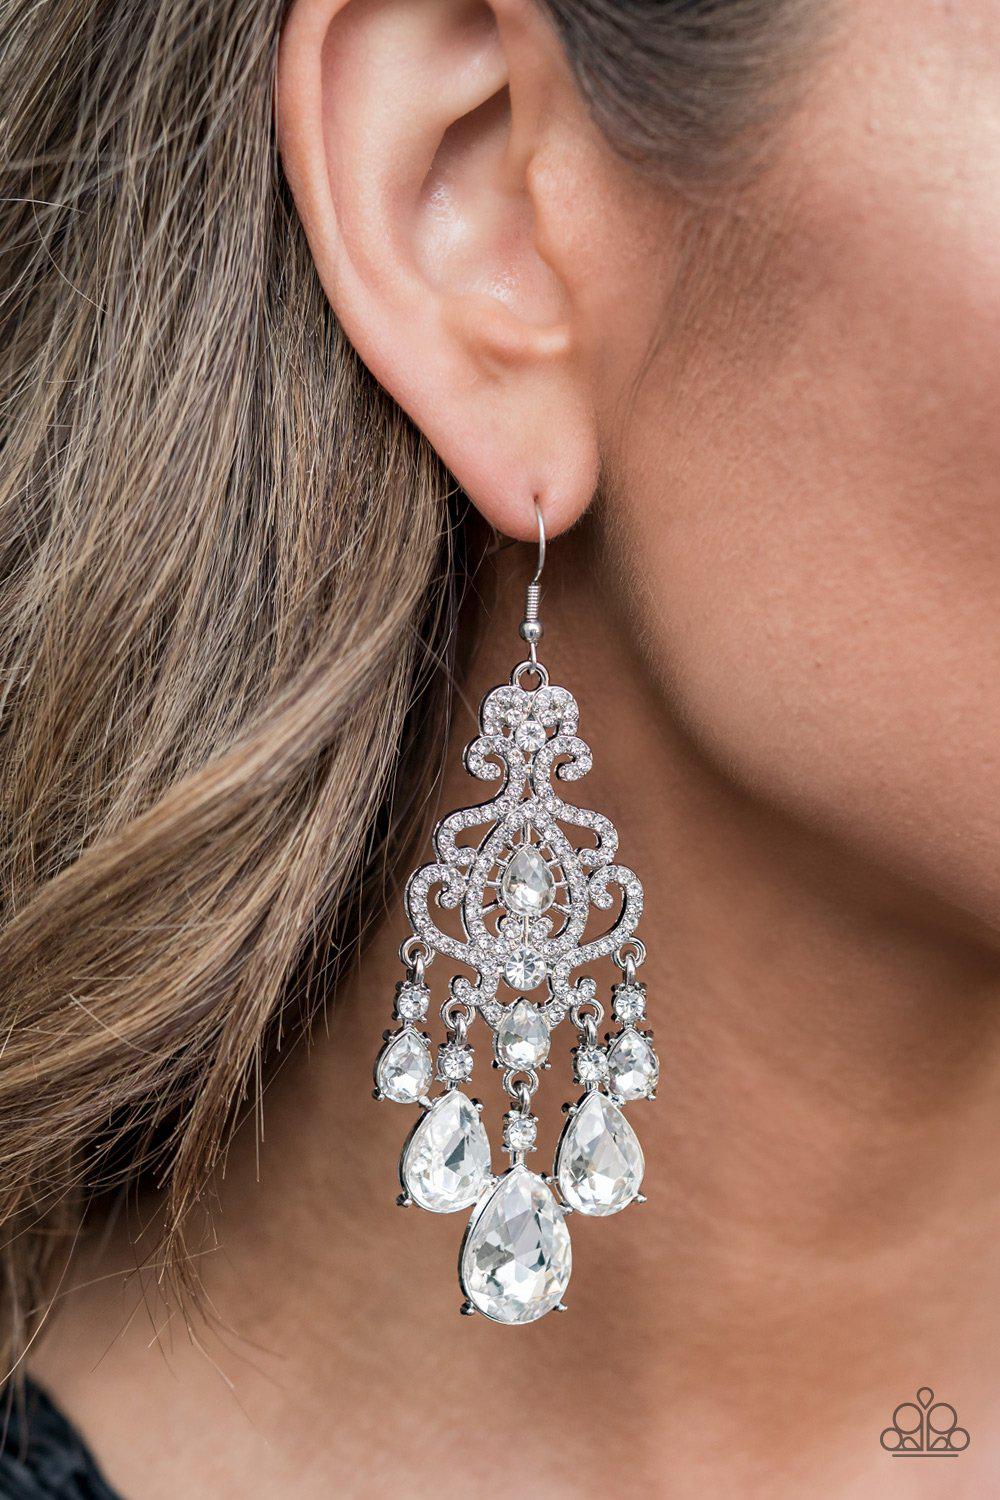 Queen Of All Things Sparkly White Rhinestone Chandelier Earrings - Paparazzi Accessories 2021 EMP Exclusive - model -CarasShop.com - $5 Jewelry by Cara Jewels